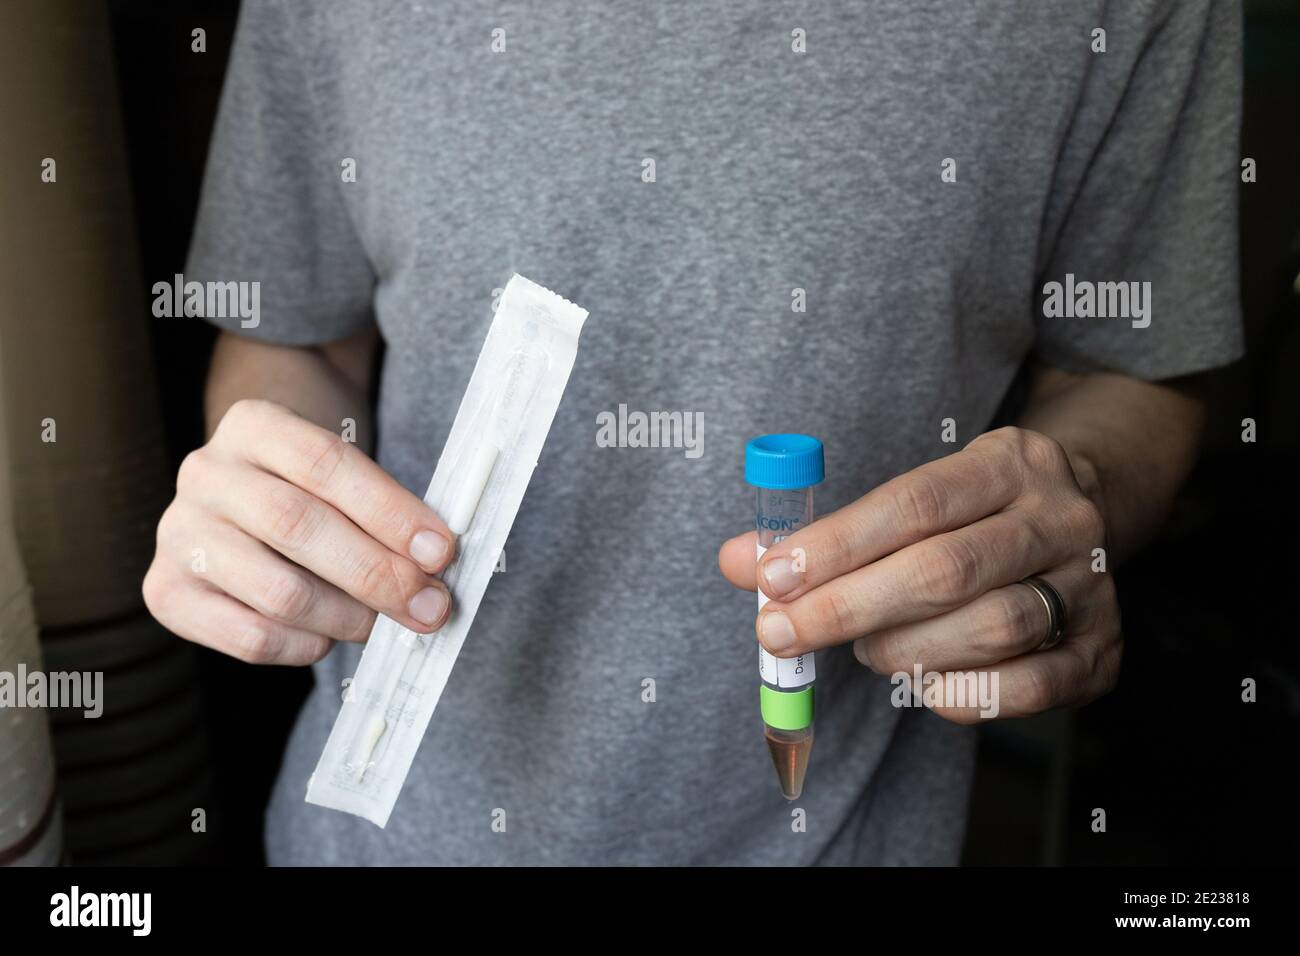 Man Holding Nasal Swab and Test Tube to Take a COVID-19 At-Home Test Stock Photo